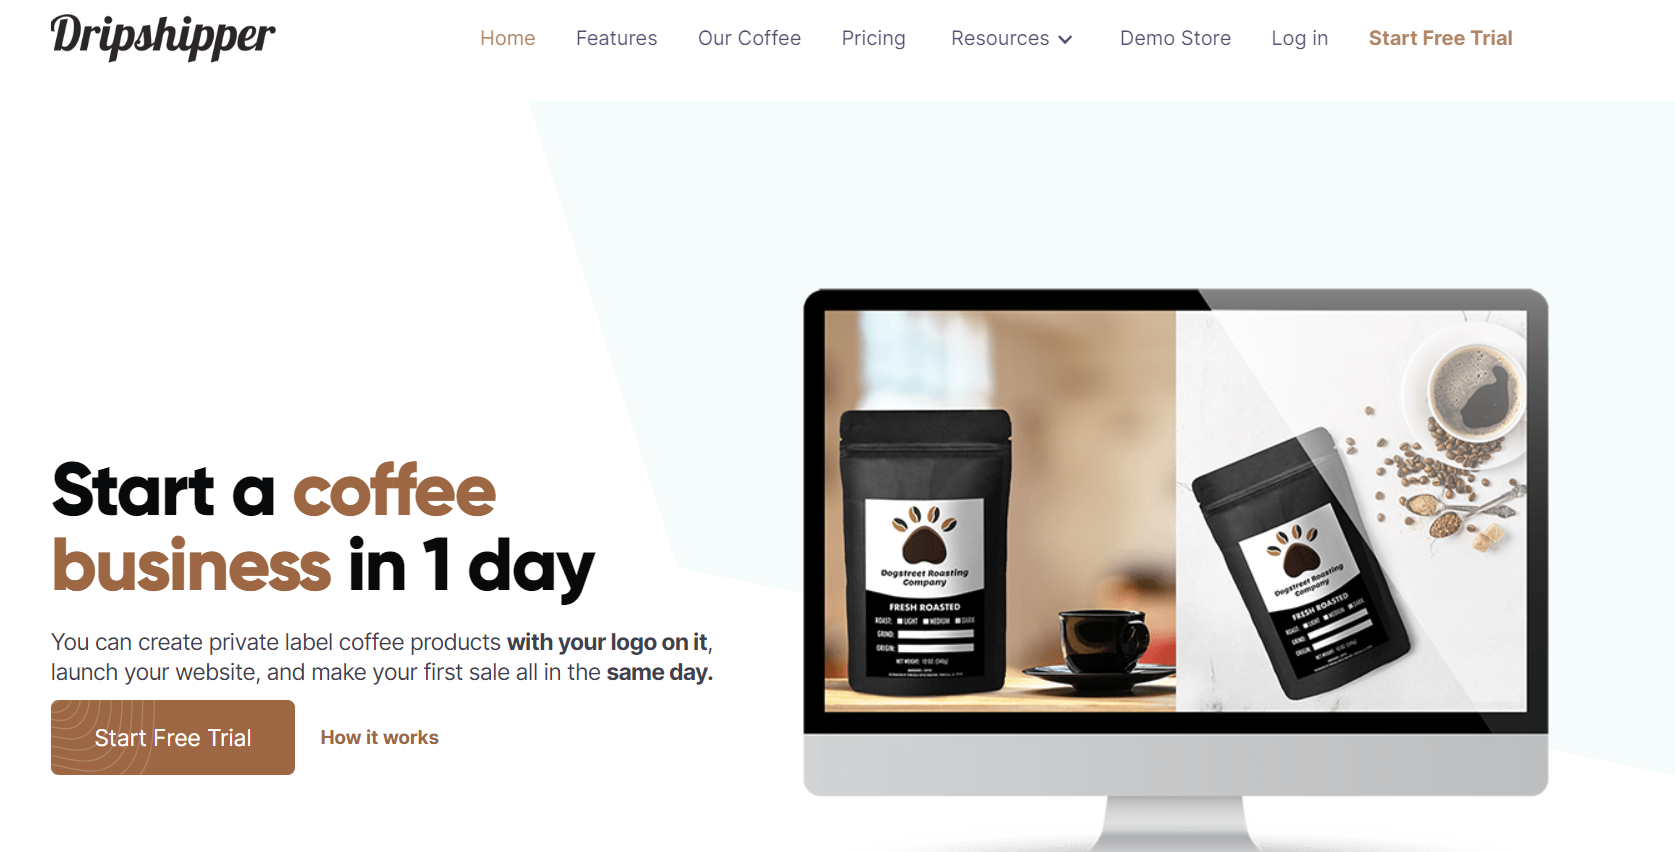 Dripshipper, a private label dropshipping supplier for coffee, operates out of the United States. They offer custom-branded coffee dropshipping, including coffee beans, ground coffee, and coffee pods. 